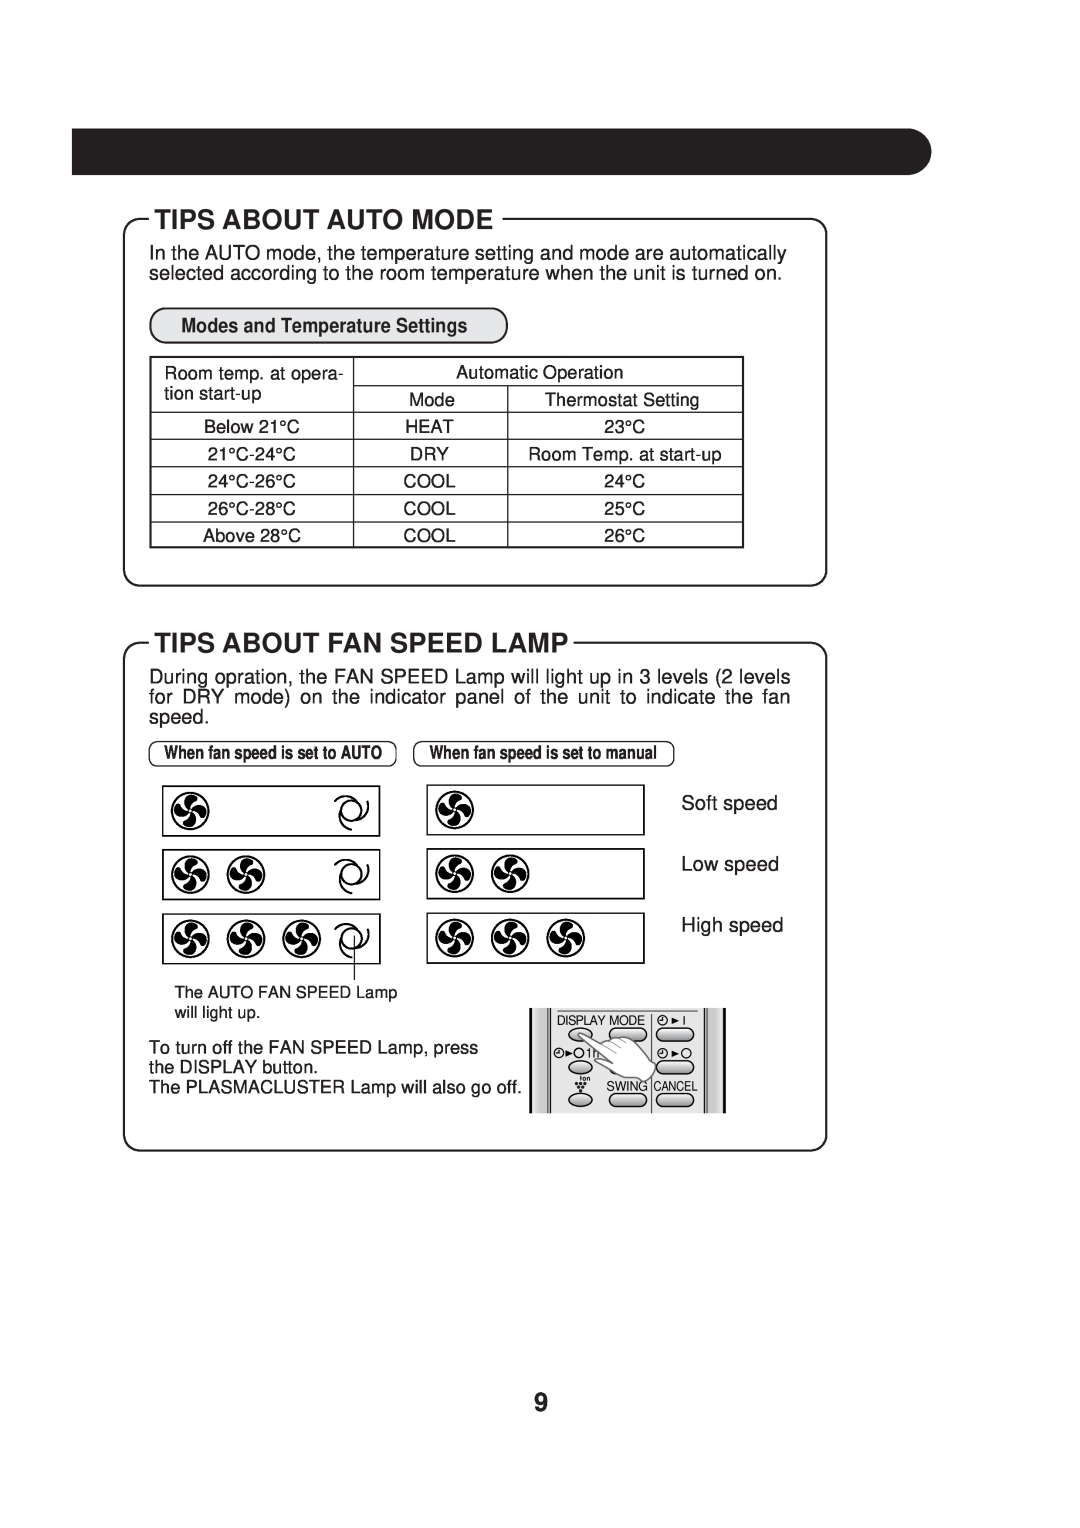 Sharp AE-A09DJ, AY-AP09DJ operation manual Tips About Auto Mode, Tips About Fan Speed Lamp, Modes and Temperature Settings 